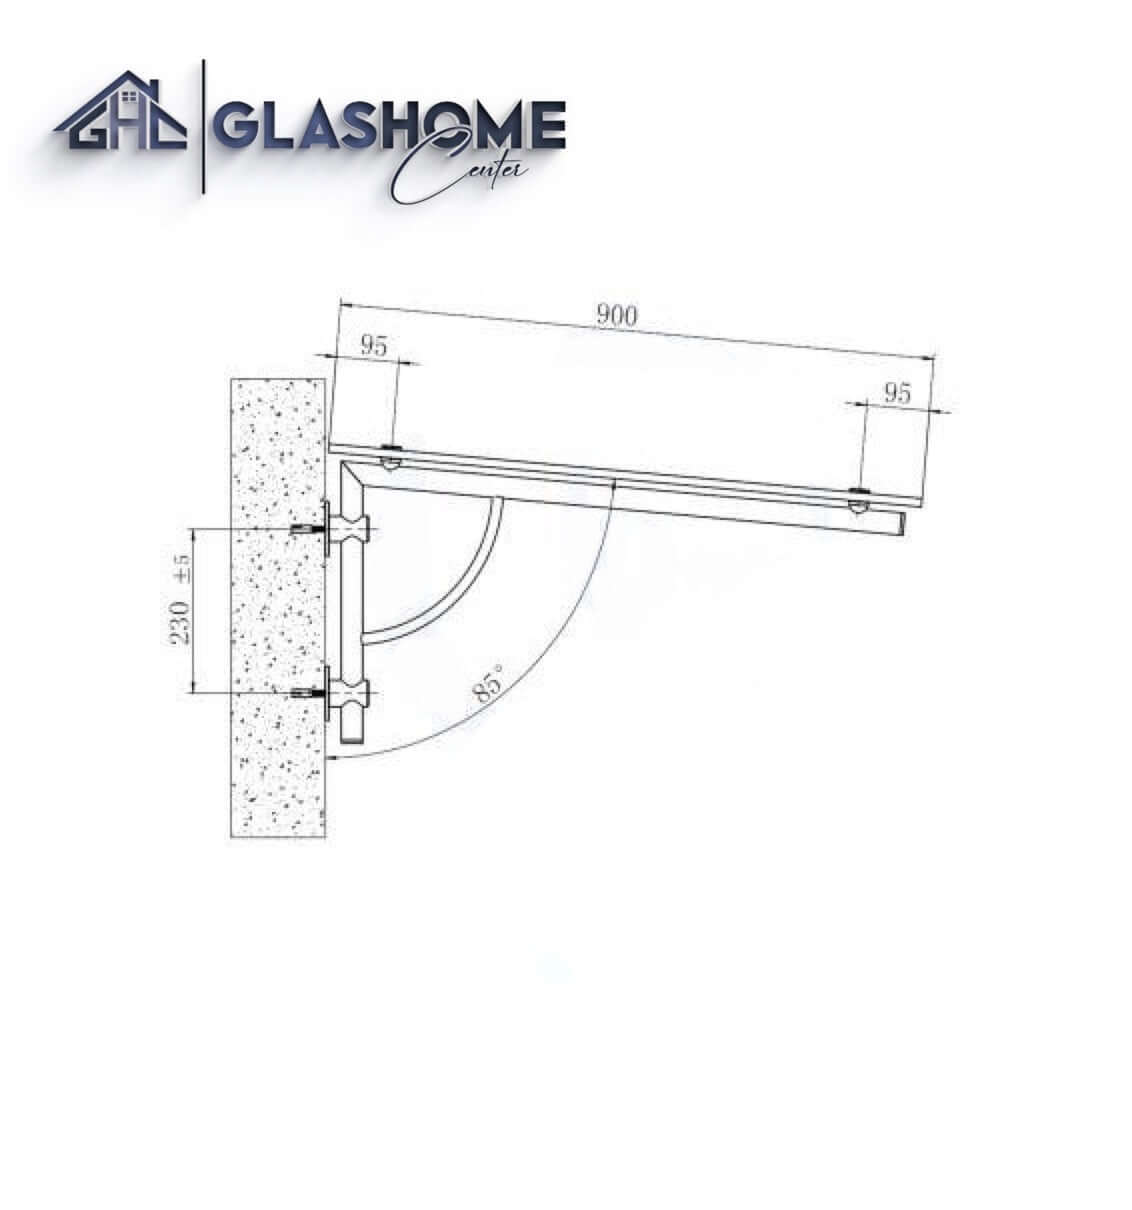 GlasHomeCenter - glass canopy - gray glass - 230x90cm - 13.1mm laminated safety glass - incl. 3 stainless steel brackets variant "Athen"